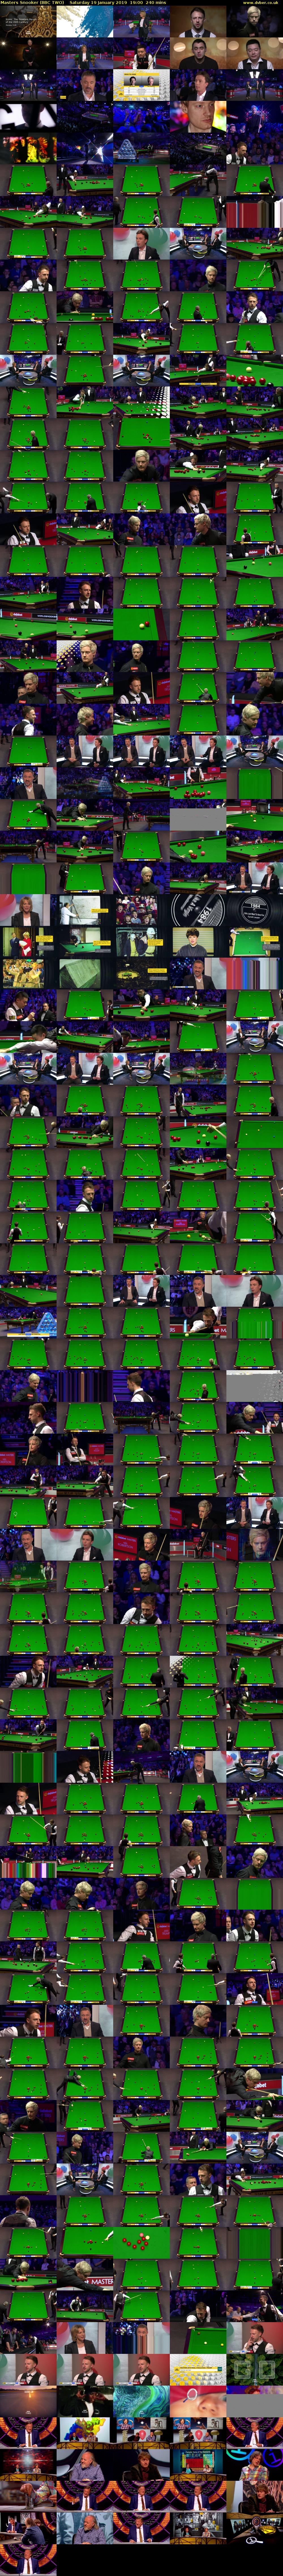 Masters Snooker (BBC TWO) Saturday 19 January 2019 19:00 - 23:00